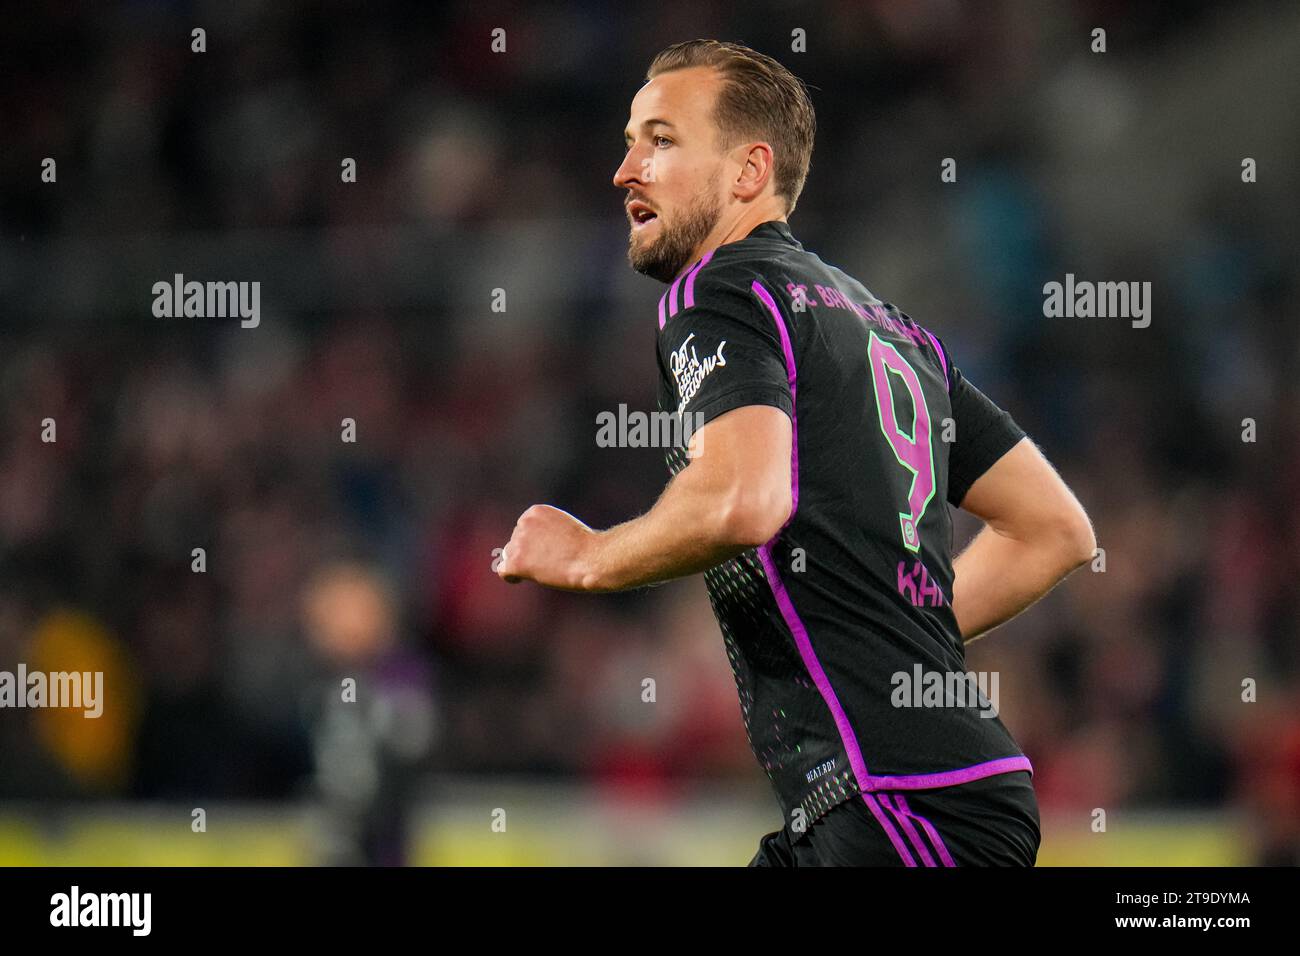 Cologne, Germany. 24th Nov, 2023. COLOGNE, GERMANY - NOVEMBER 24: Harry Kane of FC Bayern Munchen looks on during the Bundesliga match between 1. FC Koln and FC Bayern Munchen at the RheinEnergieStadion on November 24, 2023 in Cologne, Germany. (Photo by Rene Nijhuis/BSR Agency) Credit: BSR Agency/Alamy Live News Stock Photo